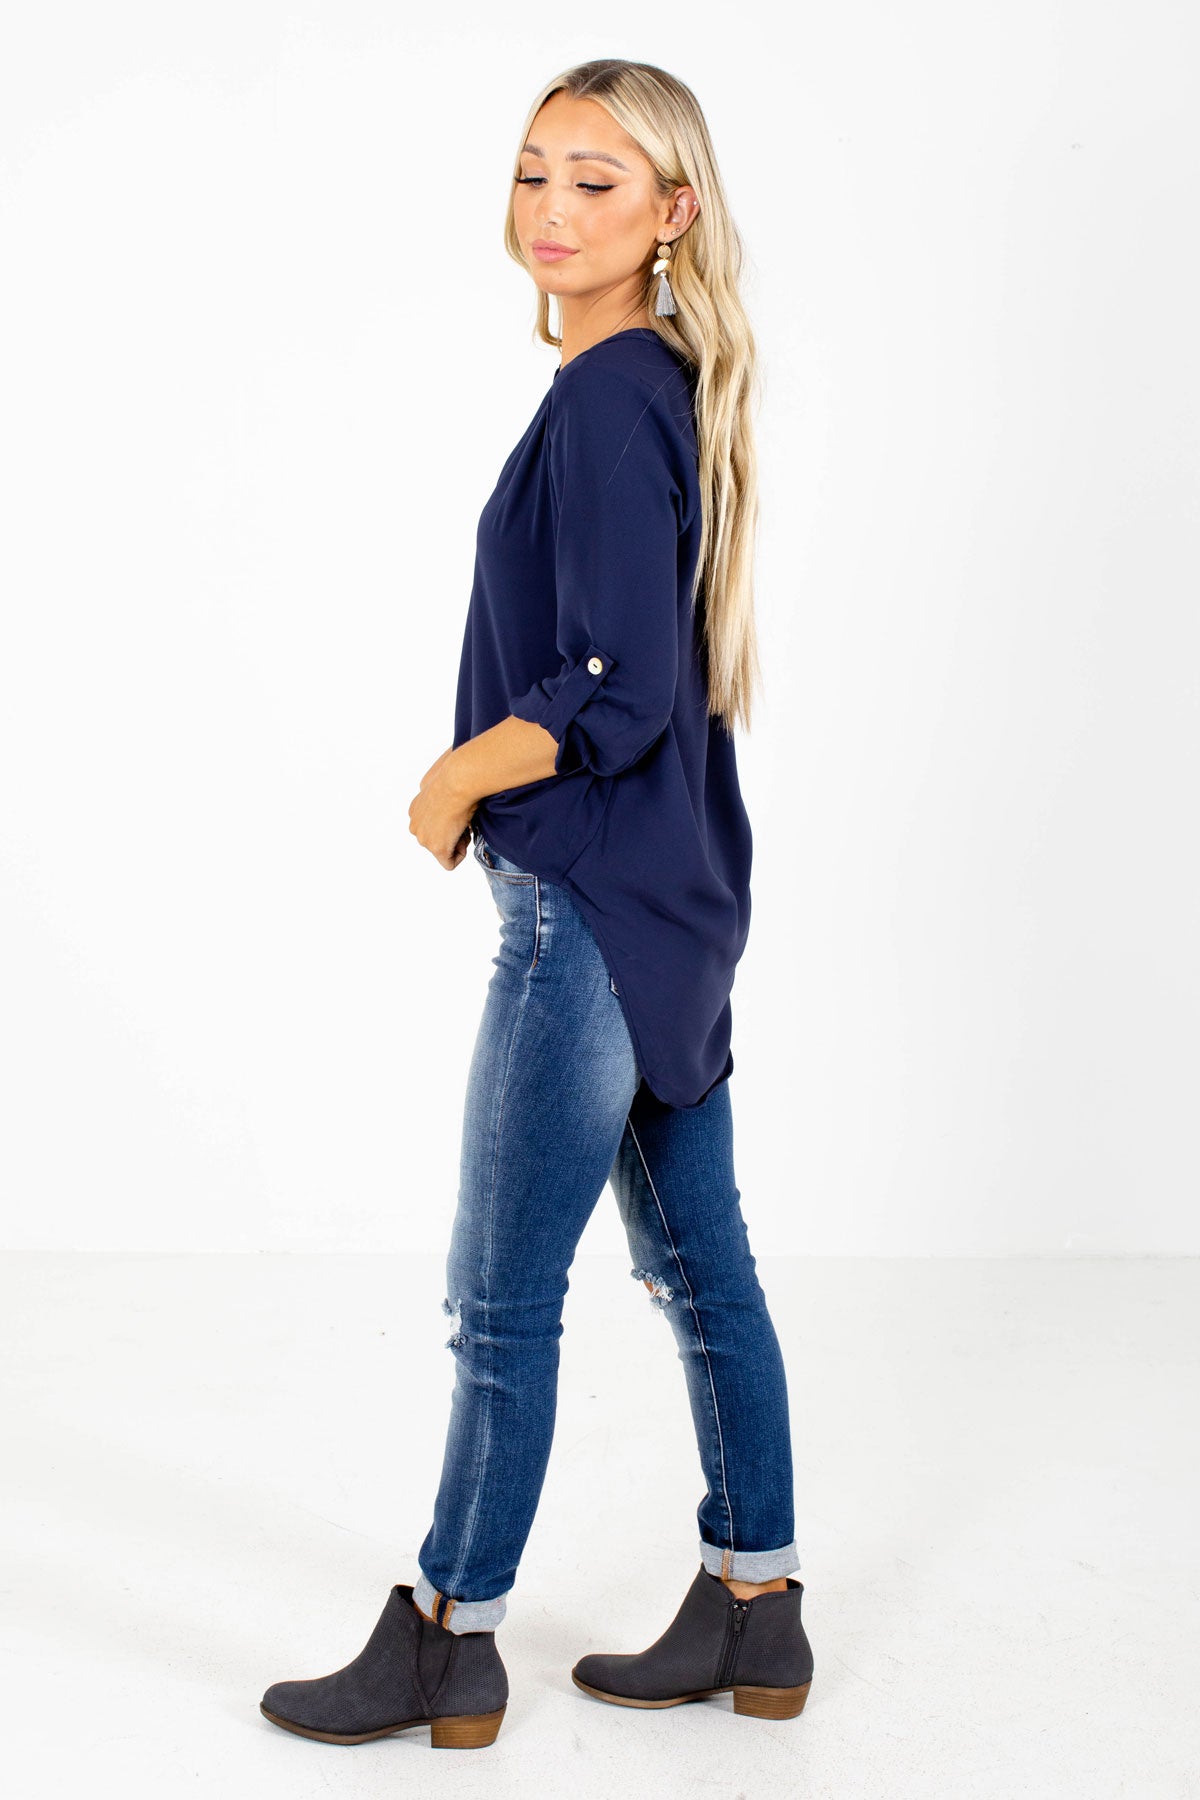 Navy Affordable Online Boutique Tops for Women